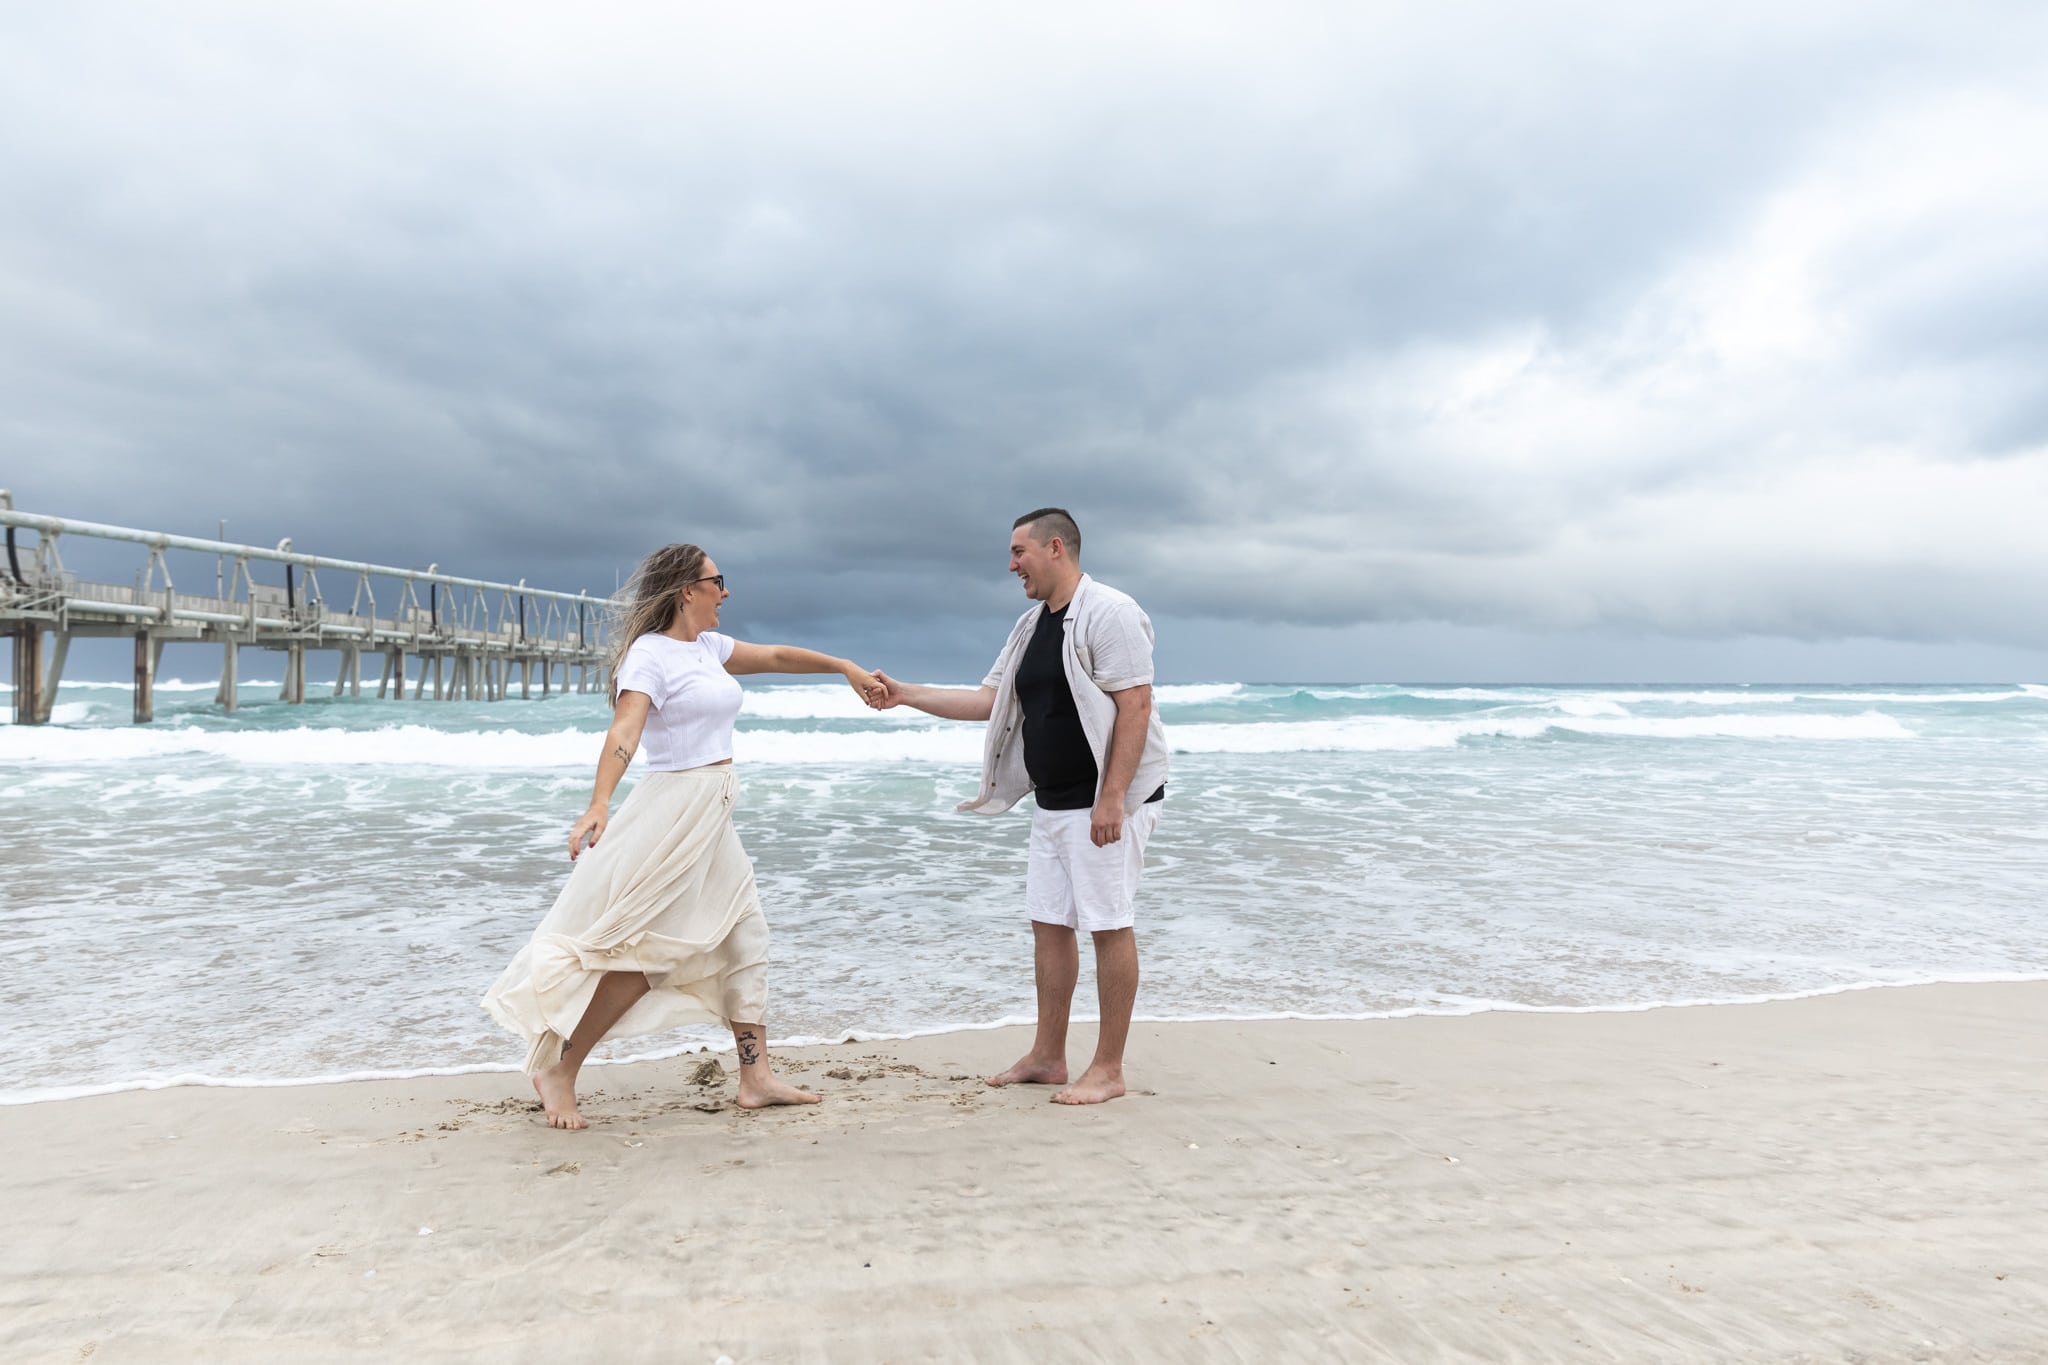 Gold Coast beach engagement couples photo shoot, by Mooi Photography.